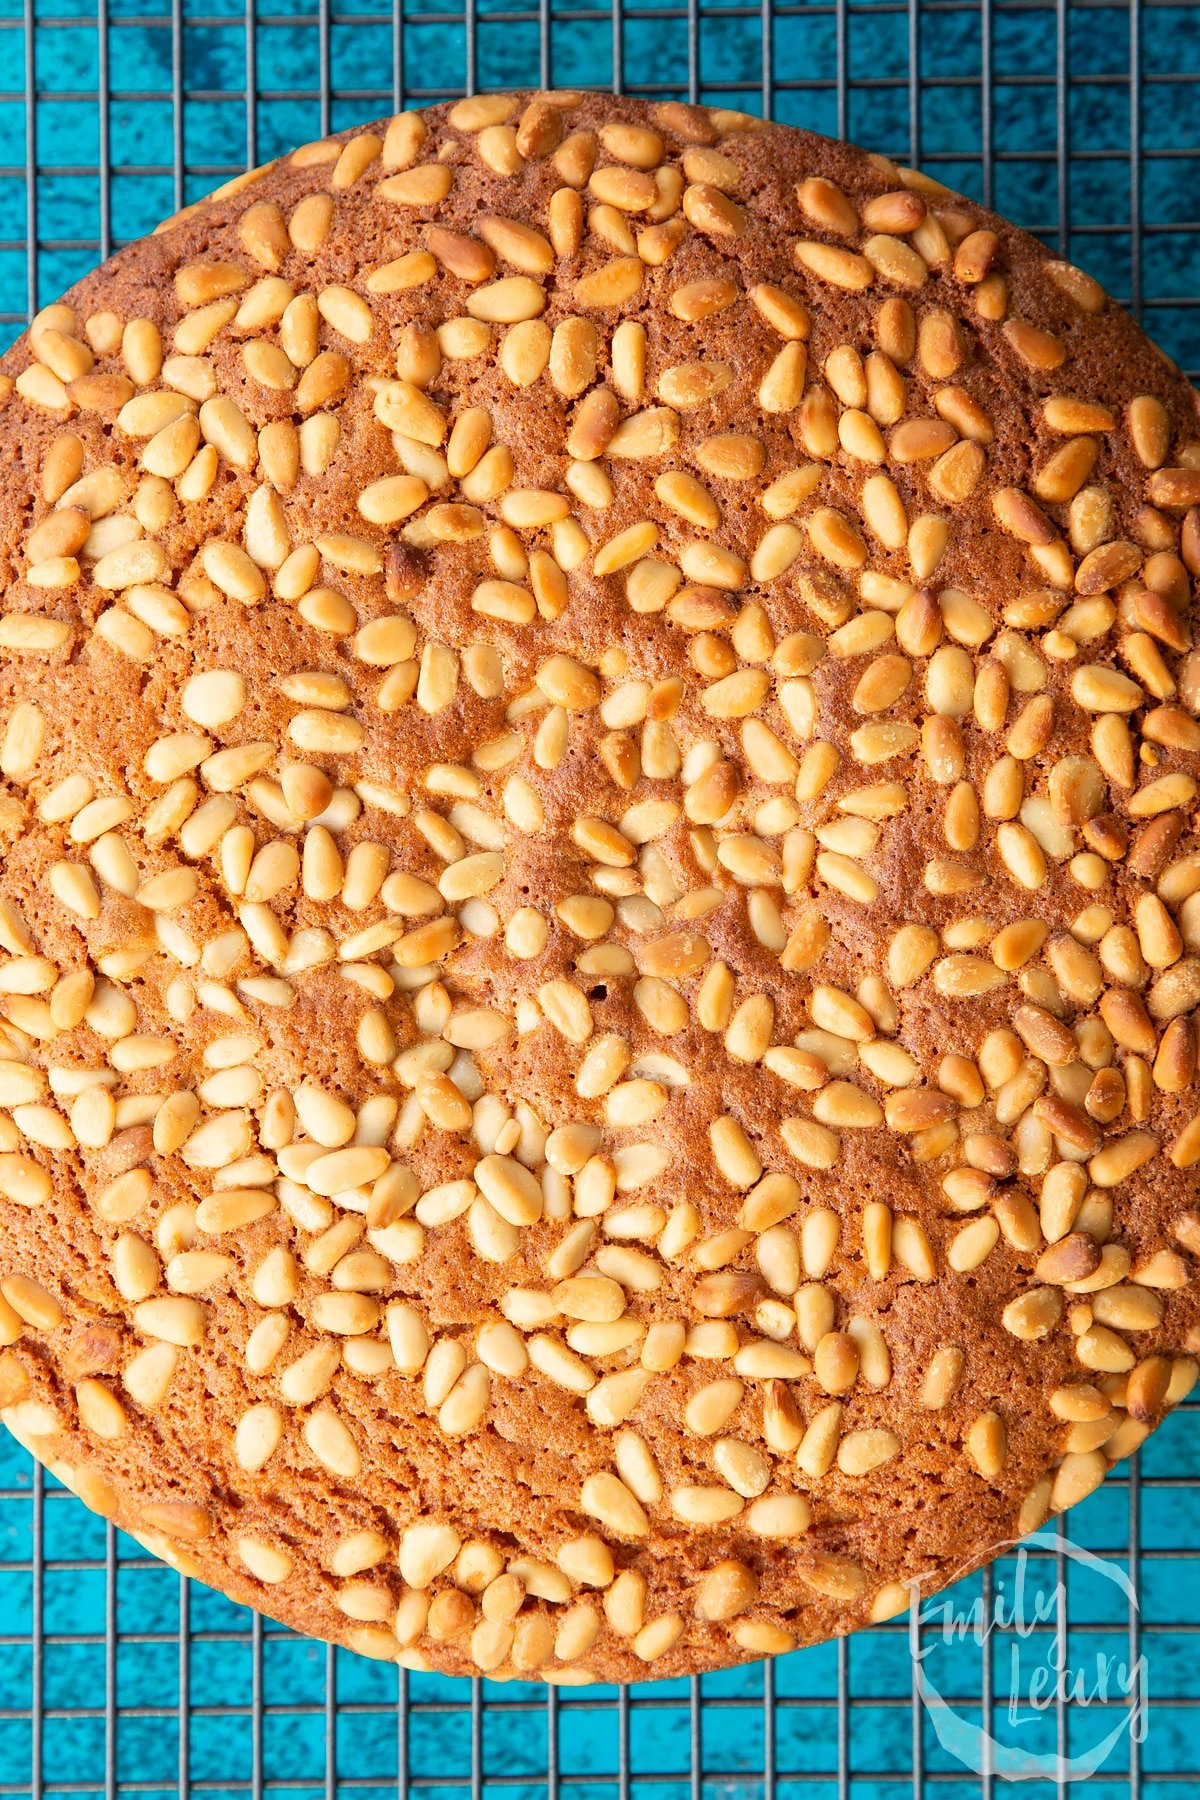 Close up of freshly baked pine nut cake on a wire rack.